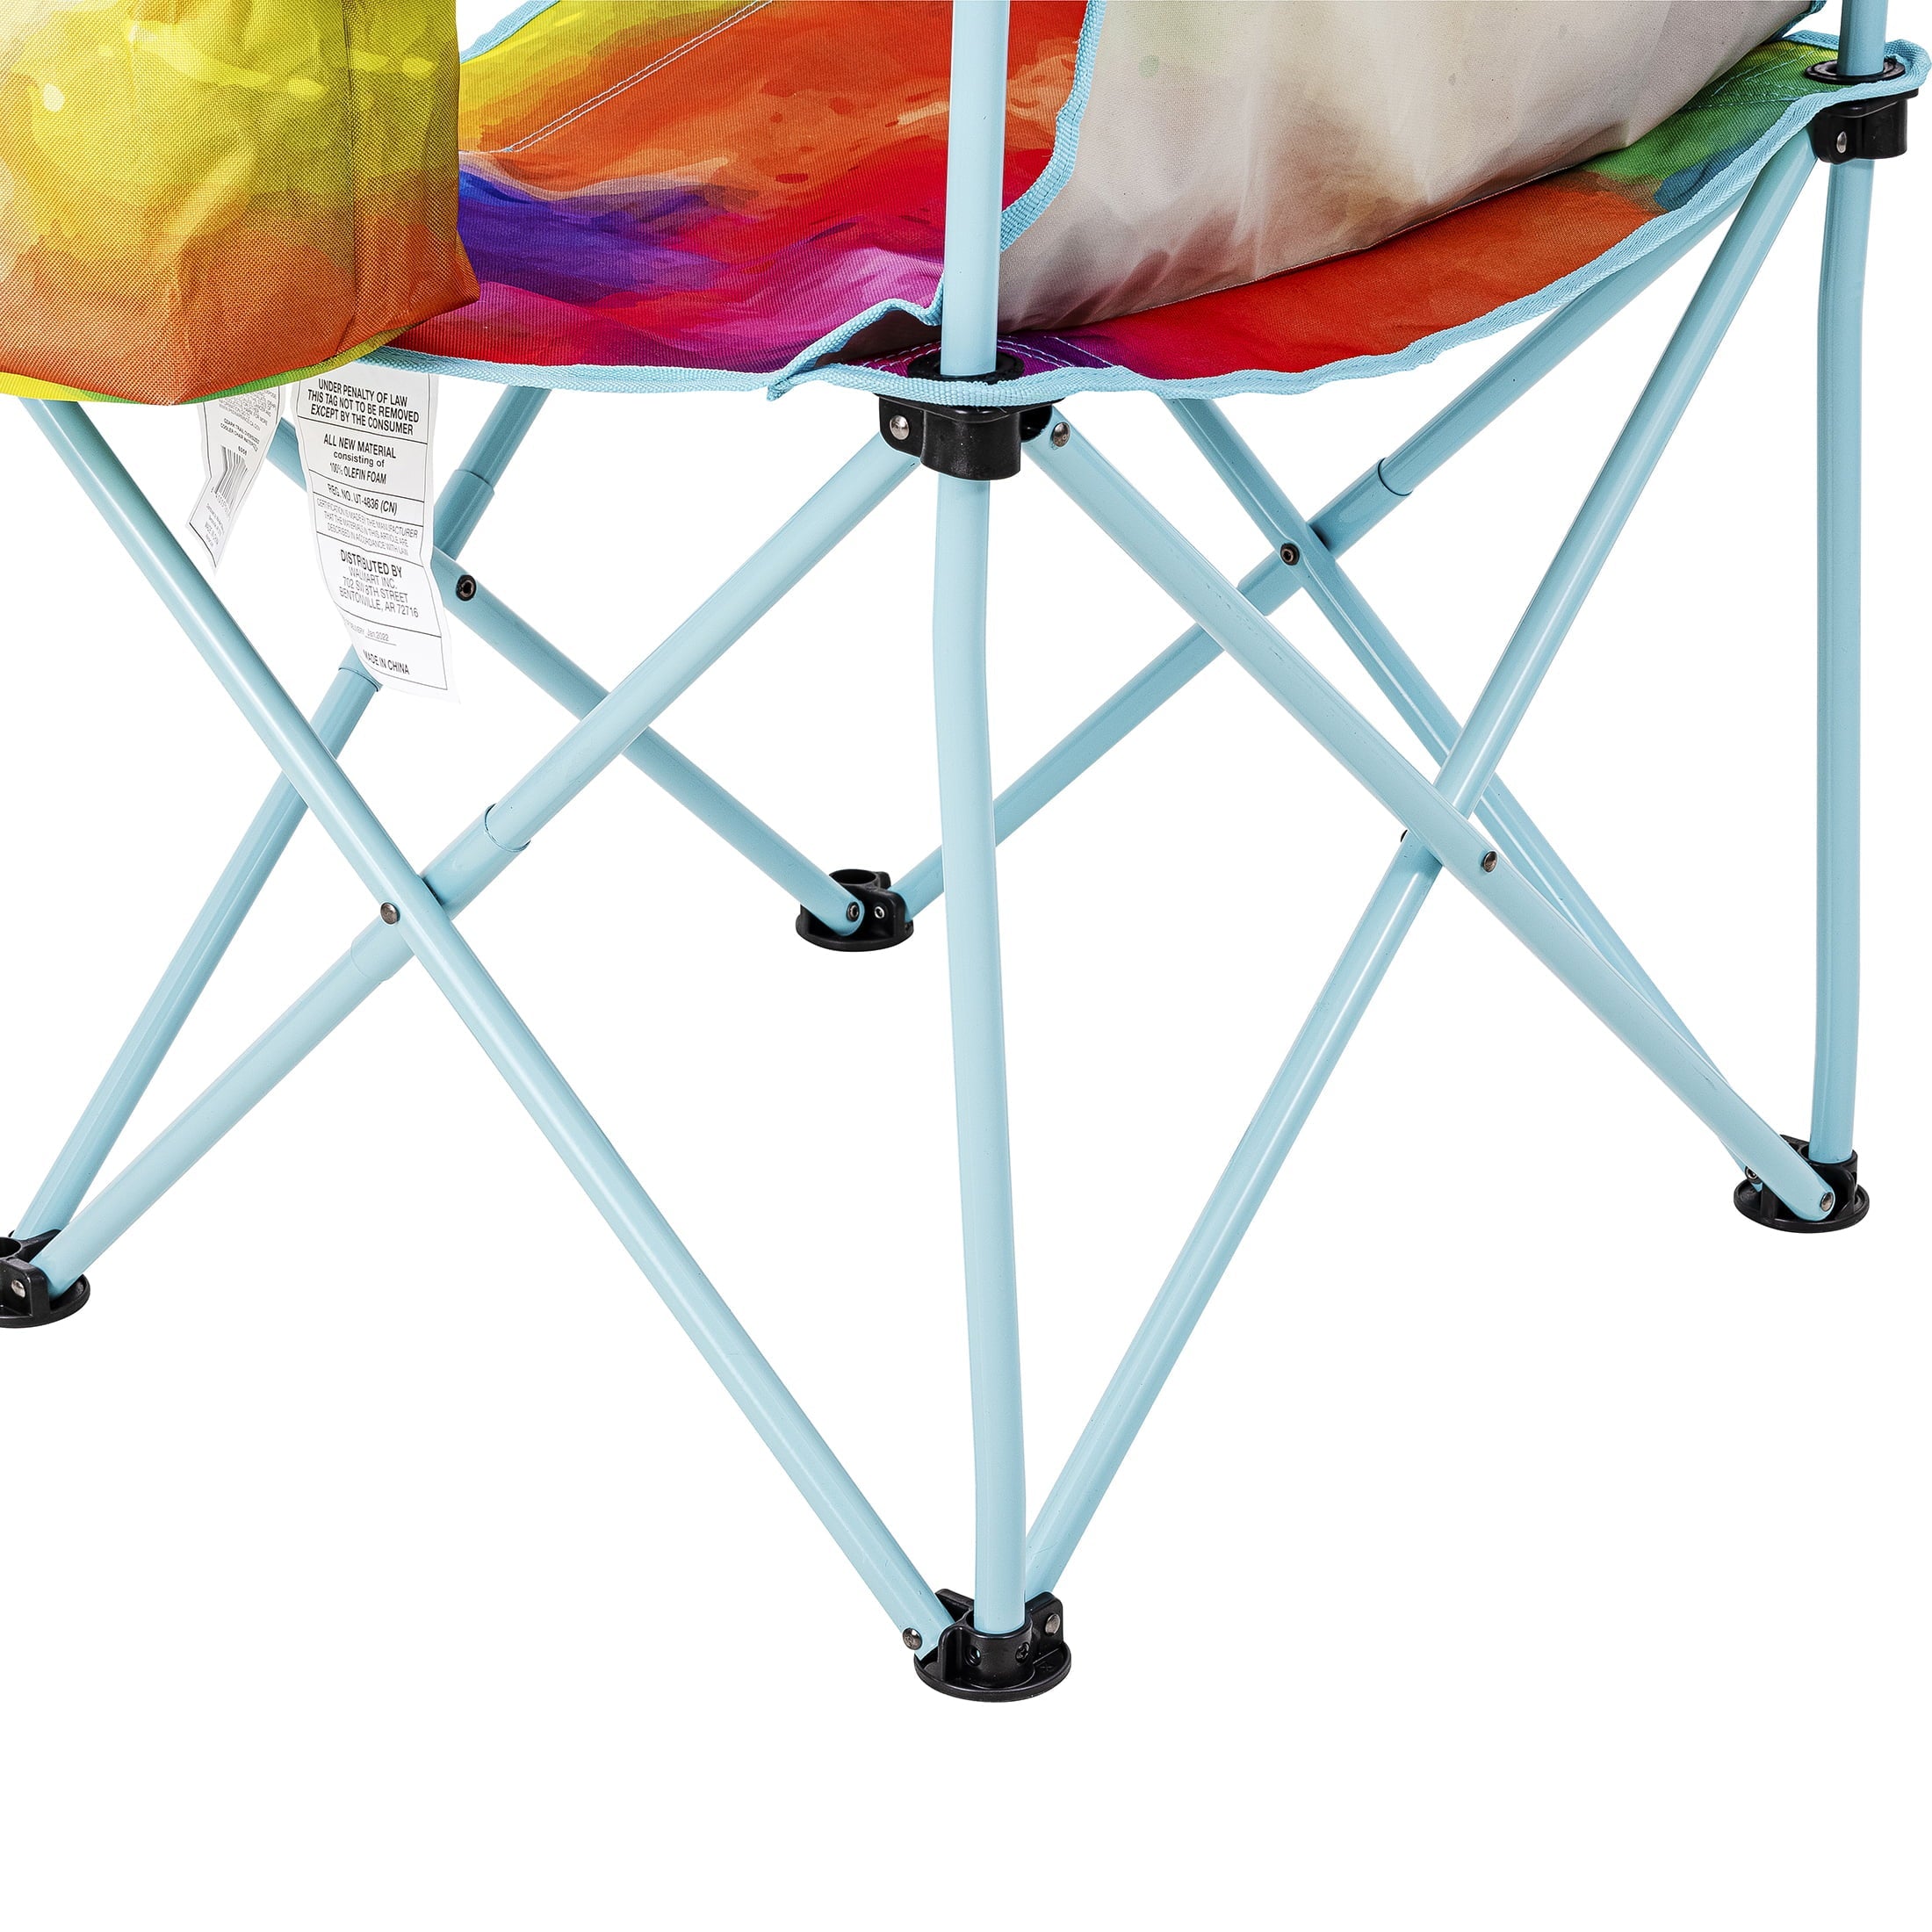 Ozark Trail Oversized Camp Chair with Cooler, Watercolor Rainbow Design, Adult